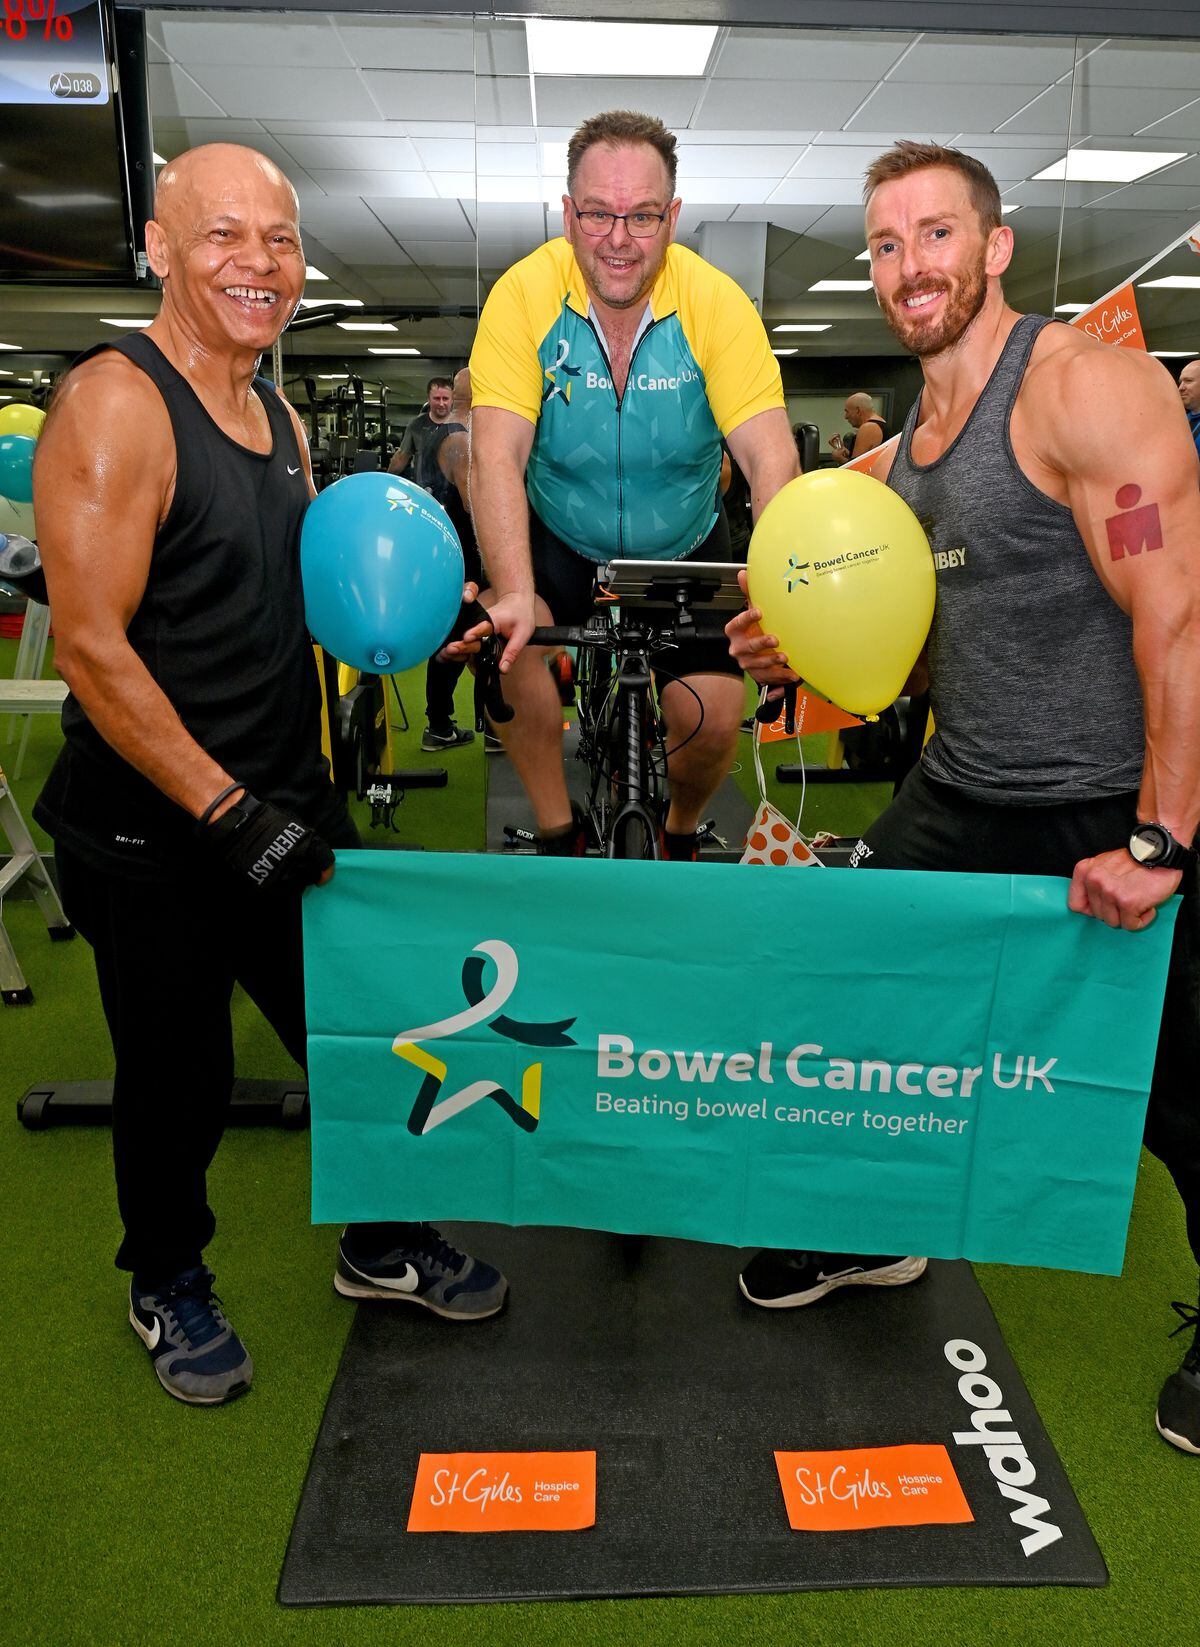 Adrian Sims is attempting to ride 1000 miles on an exercise bike at Village Hotel, Walsall, in memory of his fianceé Cheryl McBreen. He is pictured with friends Ishvar Rana and Dan Kibby.